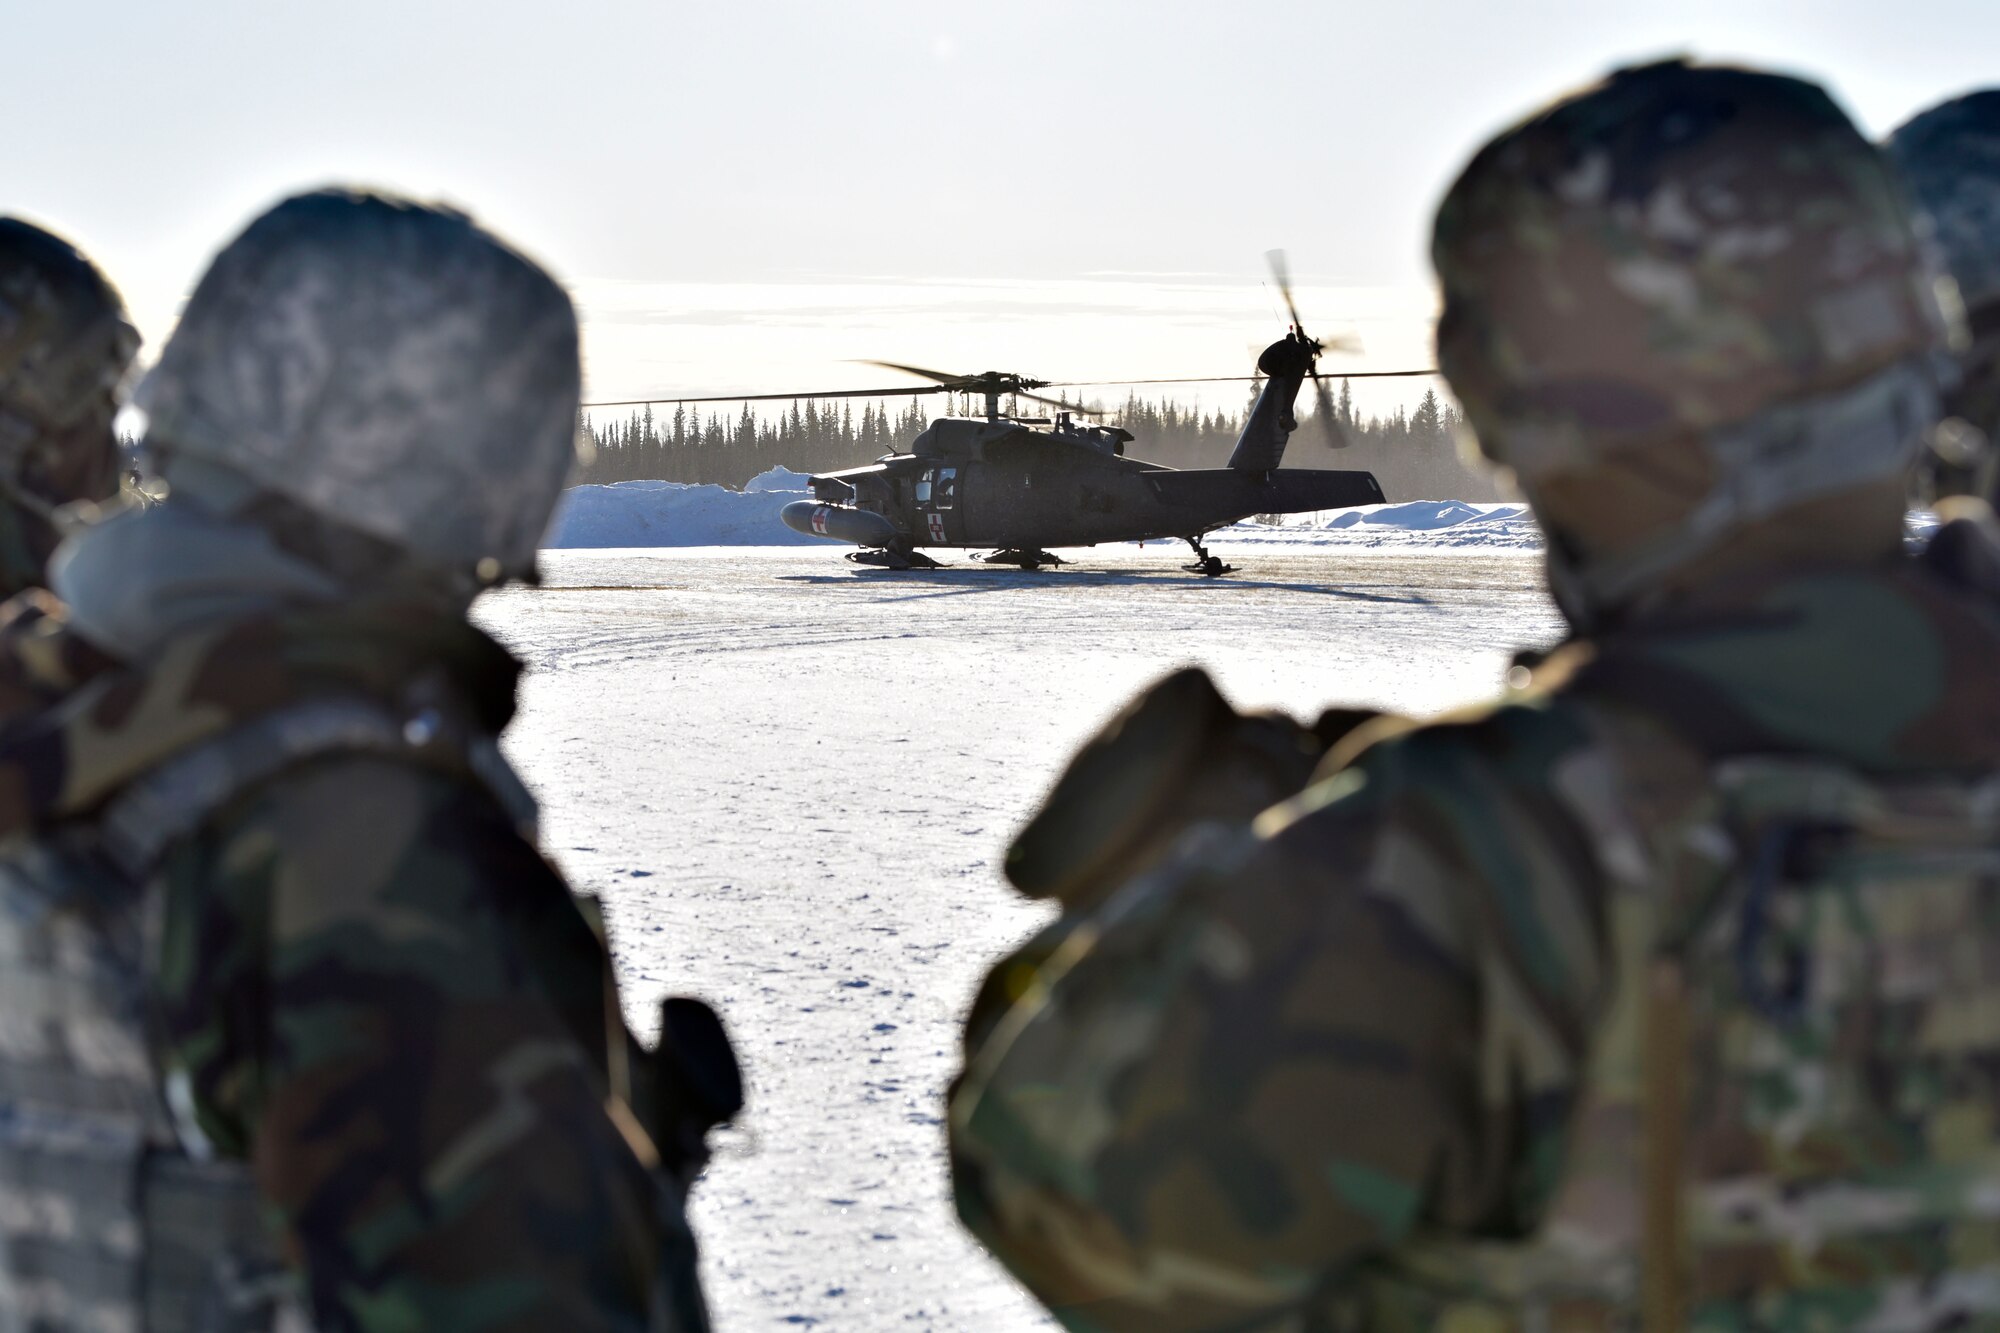 354th Security Forces Squadron defenders observe a UH-60 Blackhawk during a medical evacuation exercise on Eielson Air Force Base, Alaska, Feb. 26, 2020. Defenders loaded a simulated casualty into the aircraft and rode in the Blackhawk to familiarize themselves with the aircraft. (U.S. Air Force photo by Senior Airman Beaux Hebert)